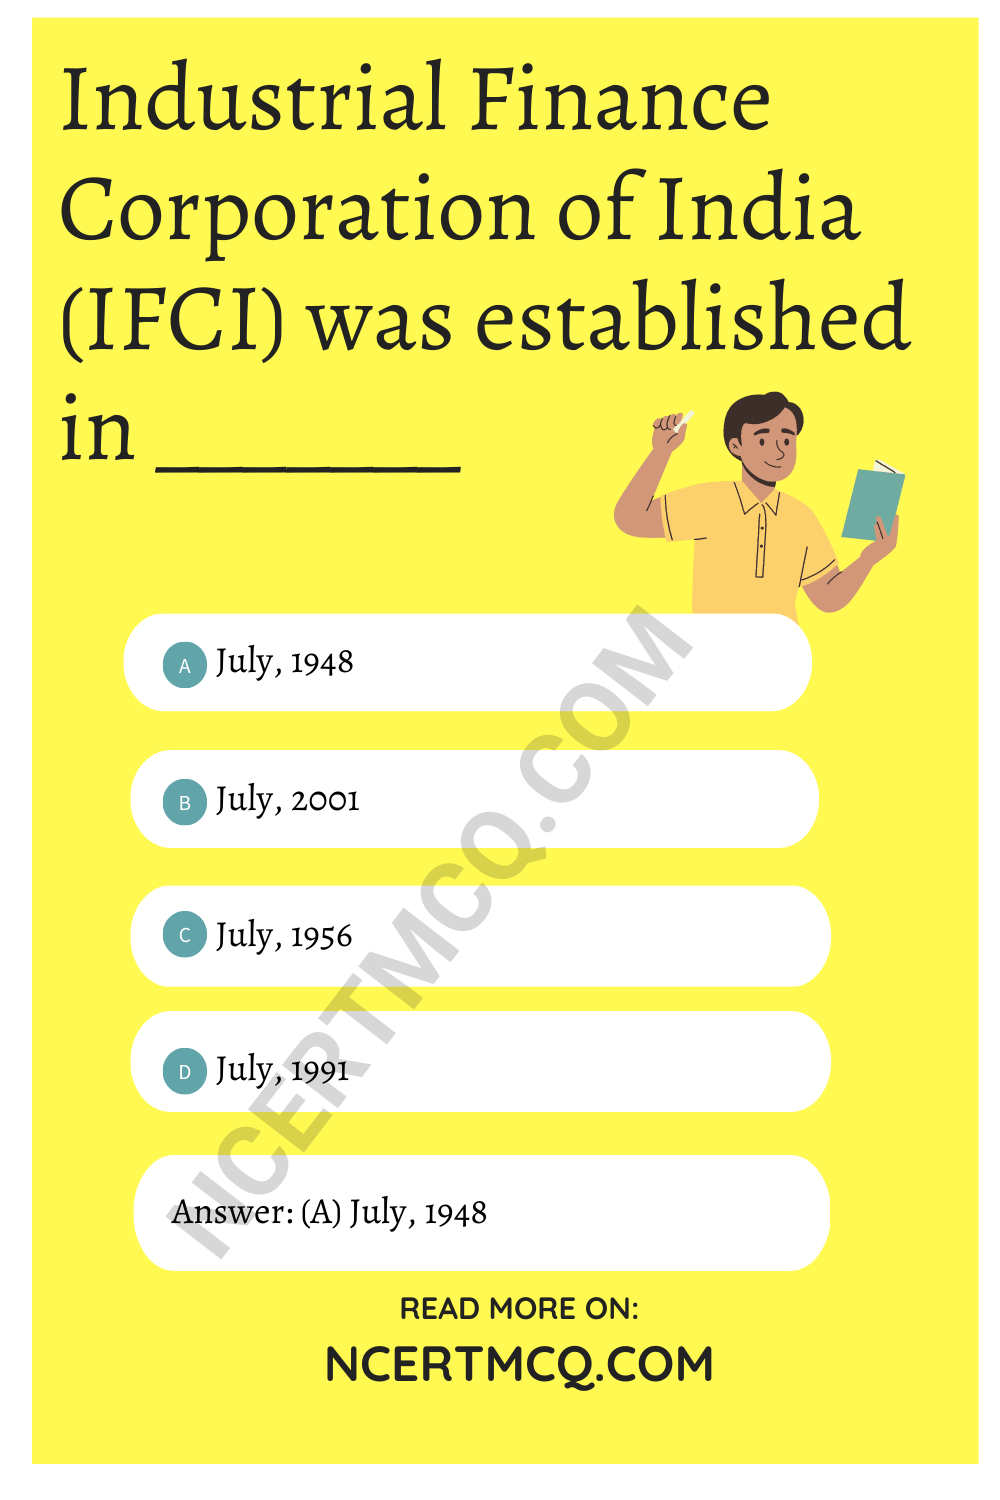 Industrial Finance Corporation of India (IFCI) was established in _______